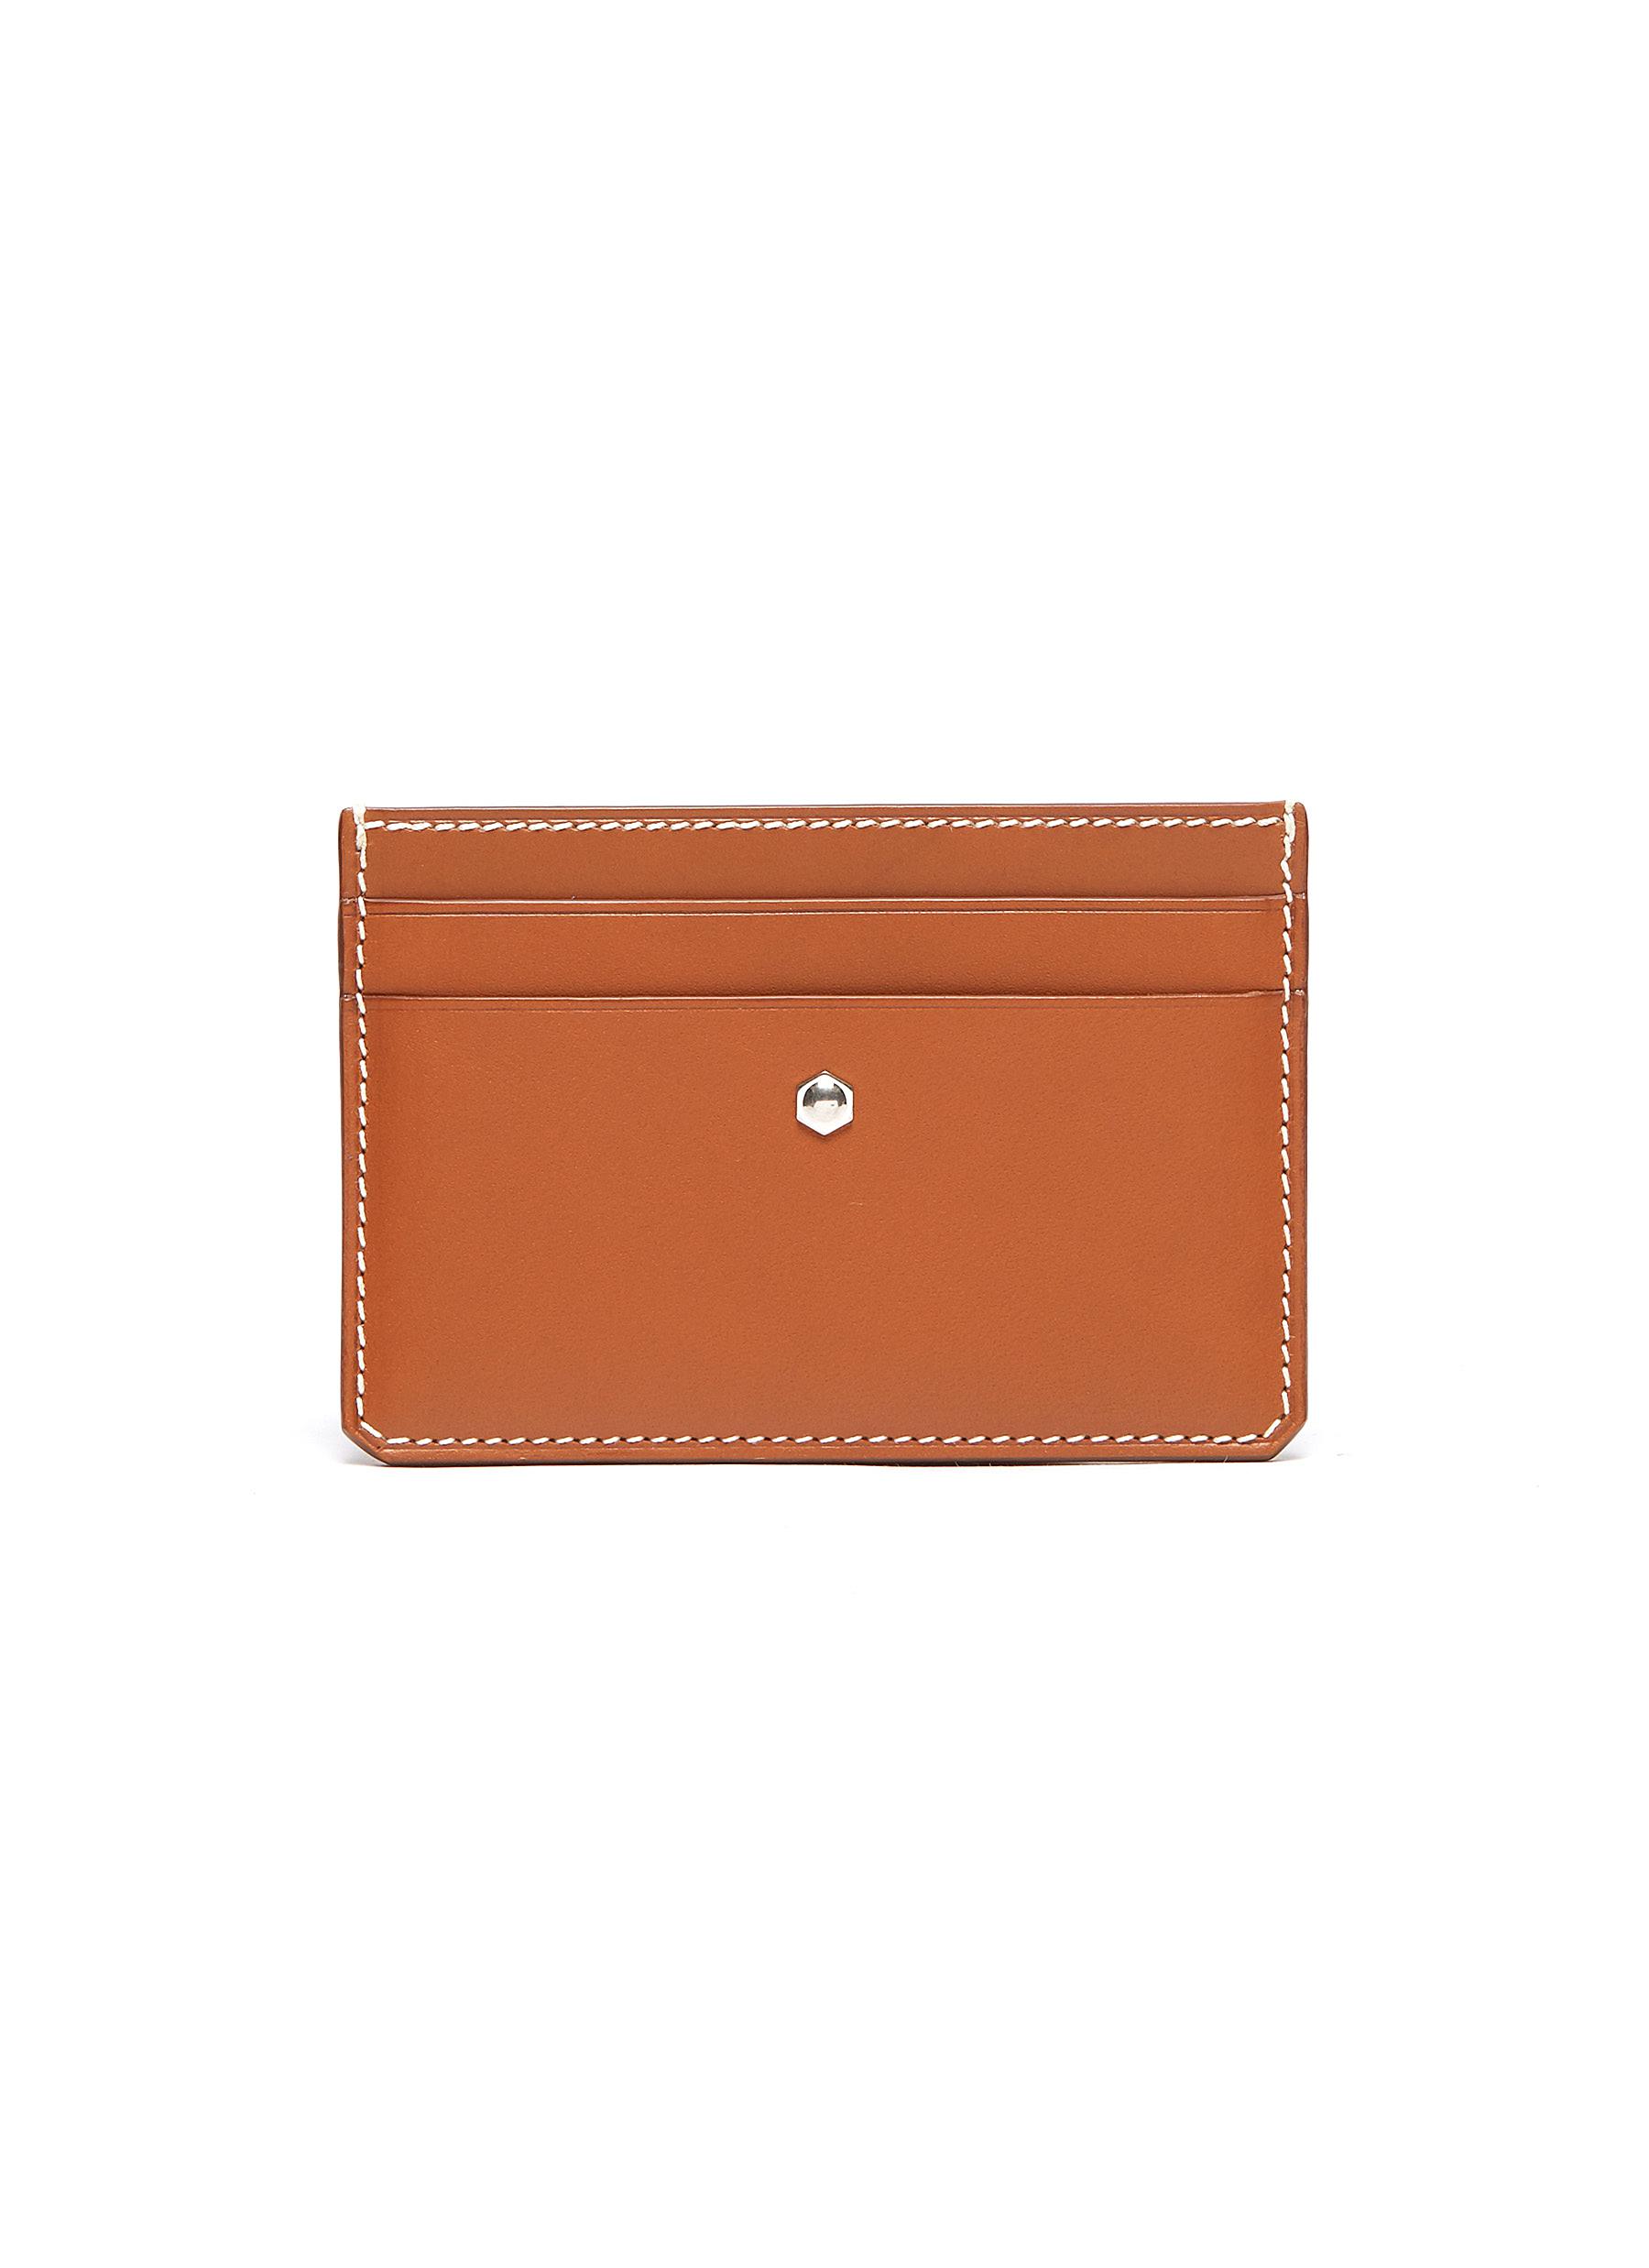 CONNOLLY 'Hex' leather card holder